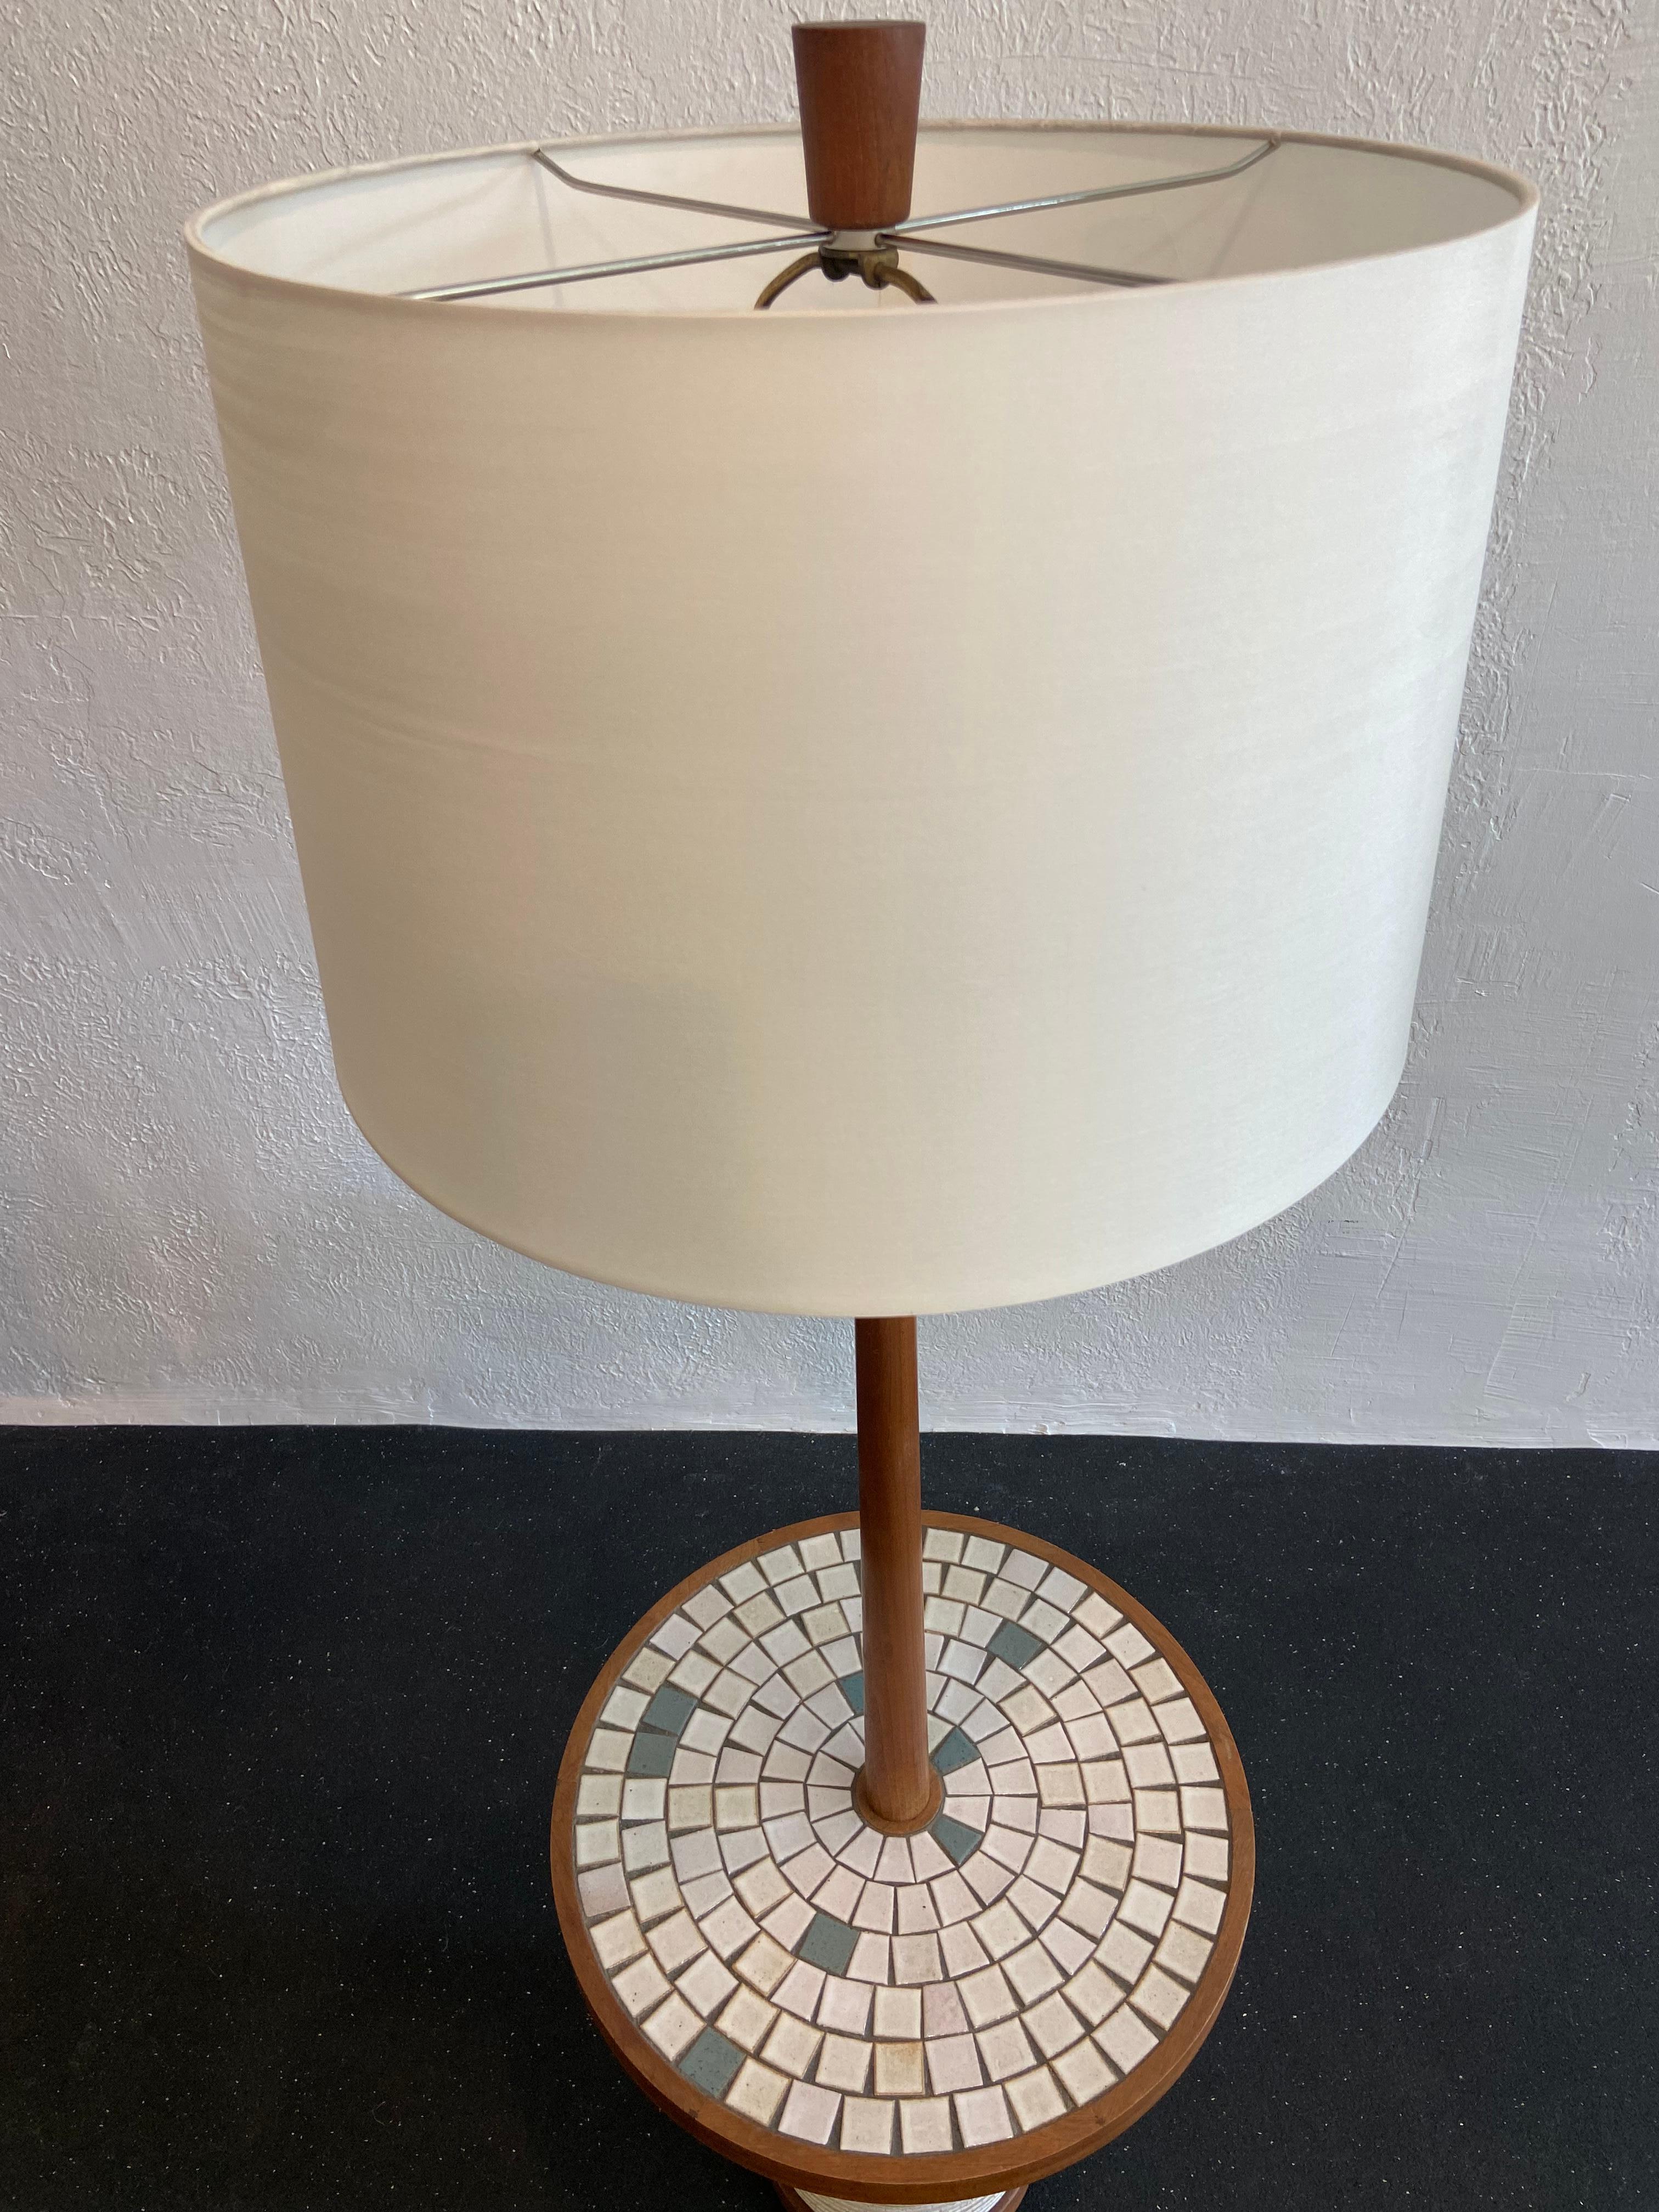 Jane and Gordon Martz ceramic floor lamp with built-in table. Original wiring/in working order. New drum shade supplied. No chips or cracks. Extremely rare example.

Would work well in a variety of interiors such as modern, mid century modern,